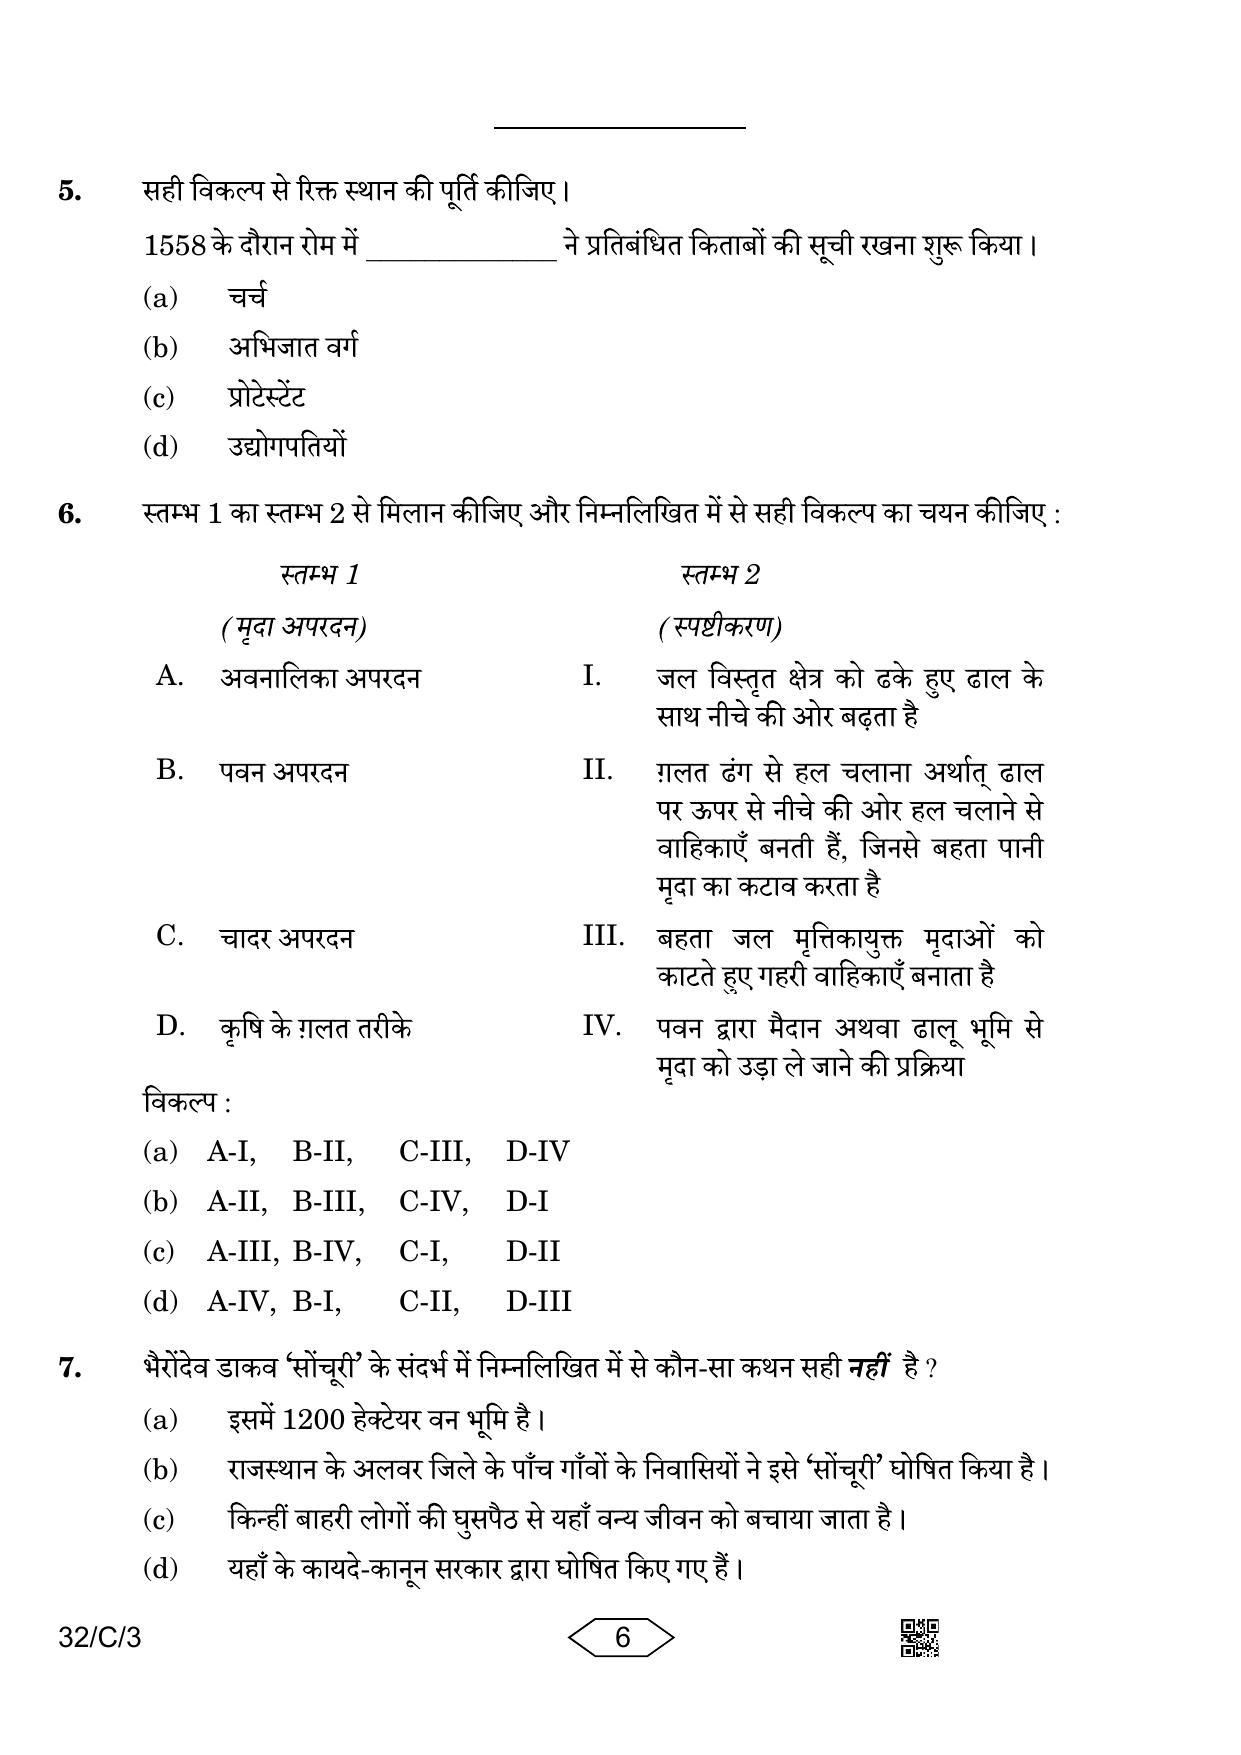 CBSE Class 10 32-3 Social Science 2023 (Compartment) Question Paper - Page 6